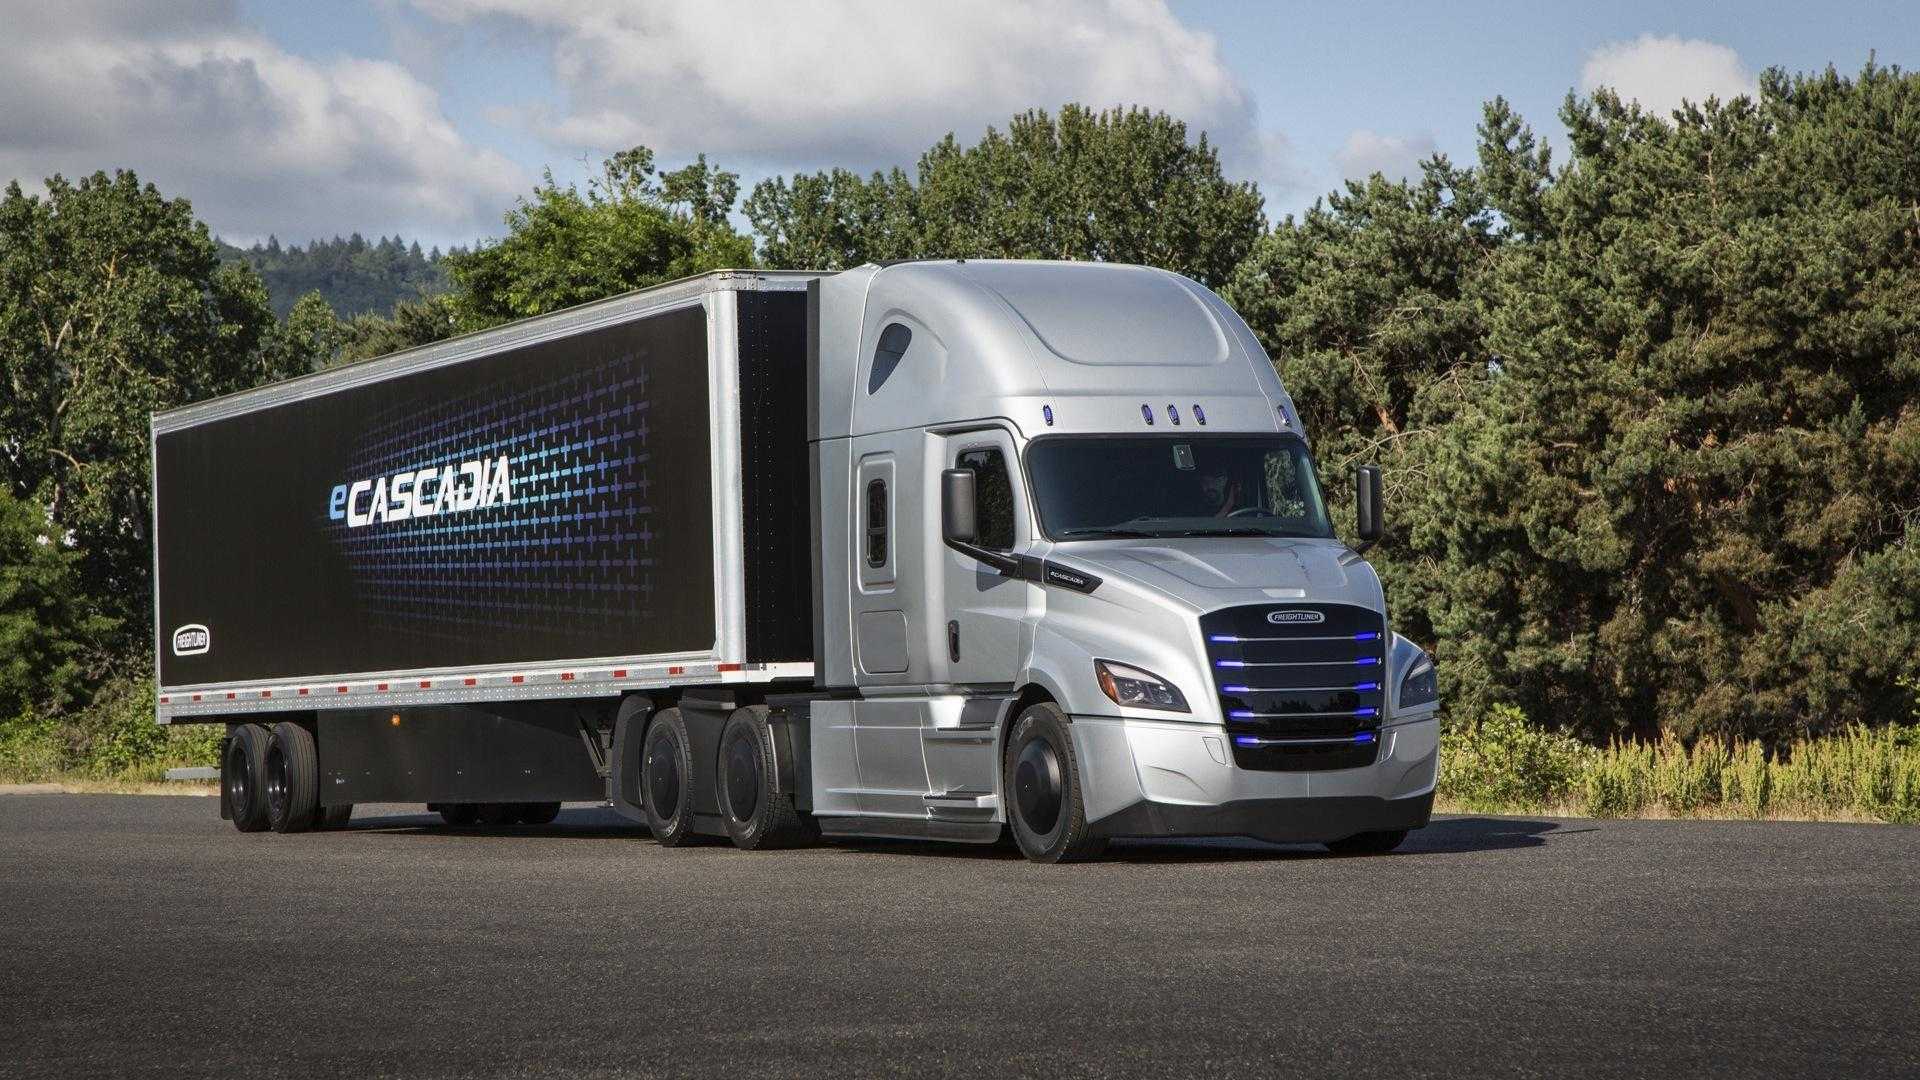 A modern-looking black and silver tractor trailer is parked against a forest.